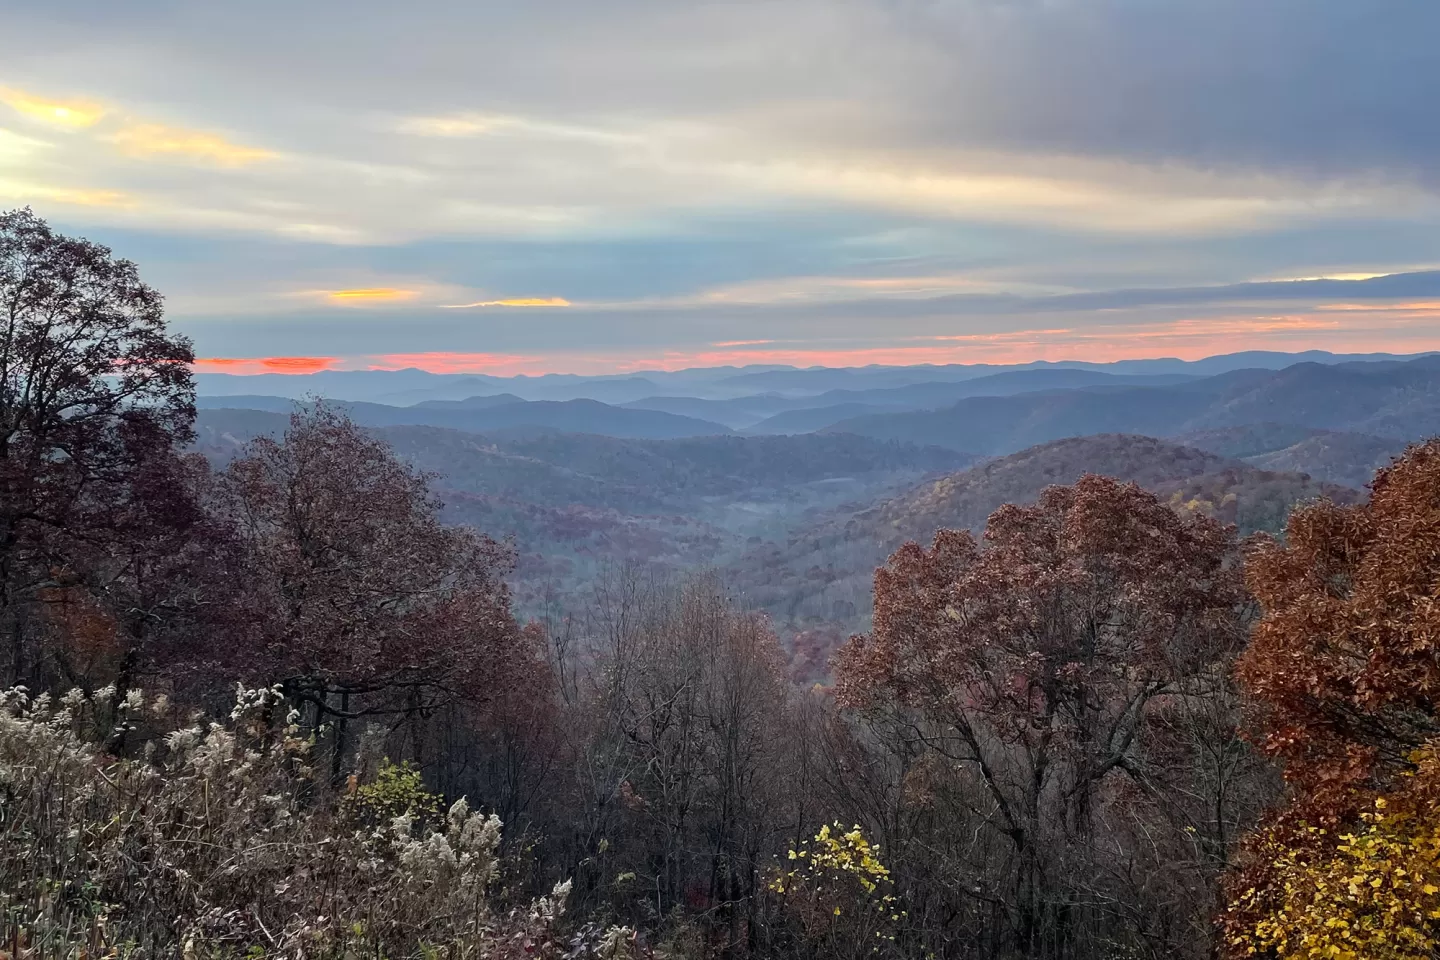 View of the Pisgah National Forest in North Carolina.